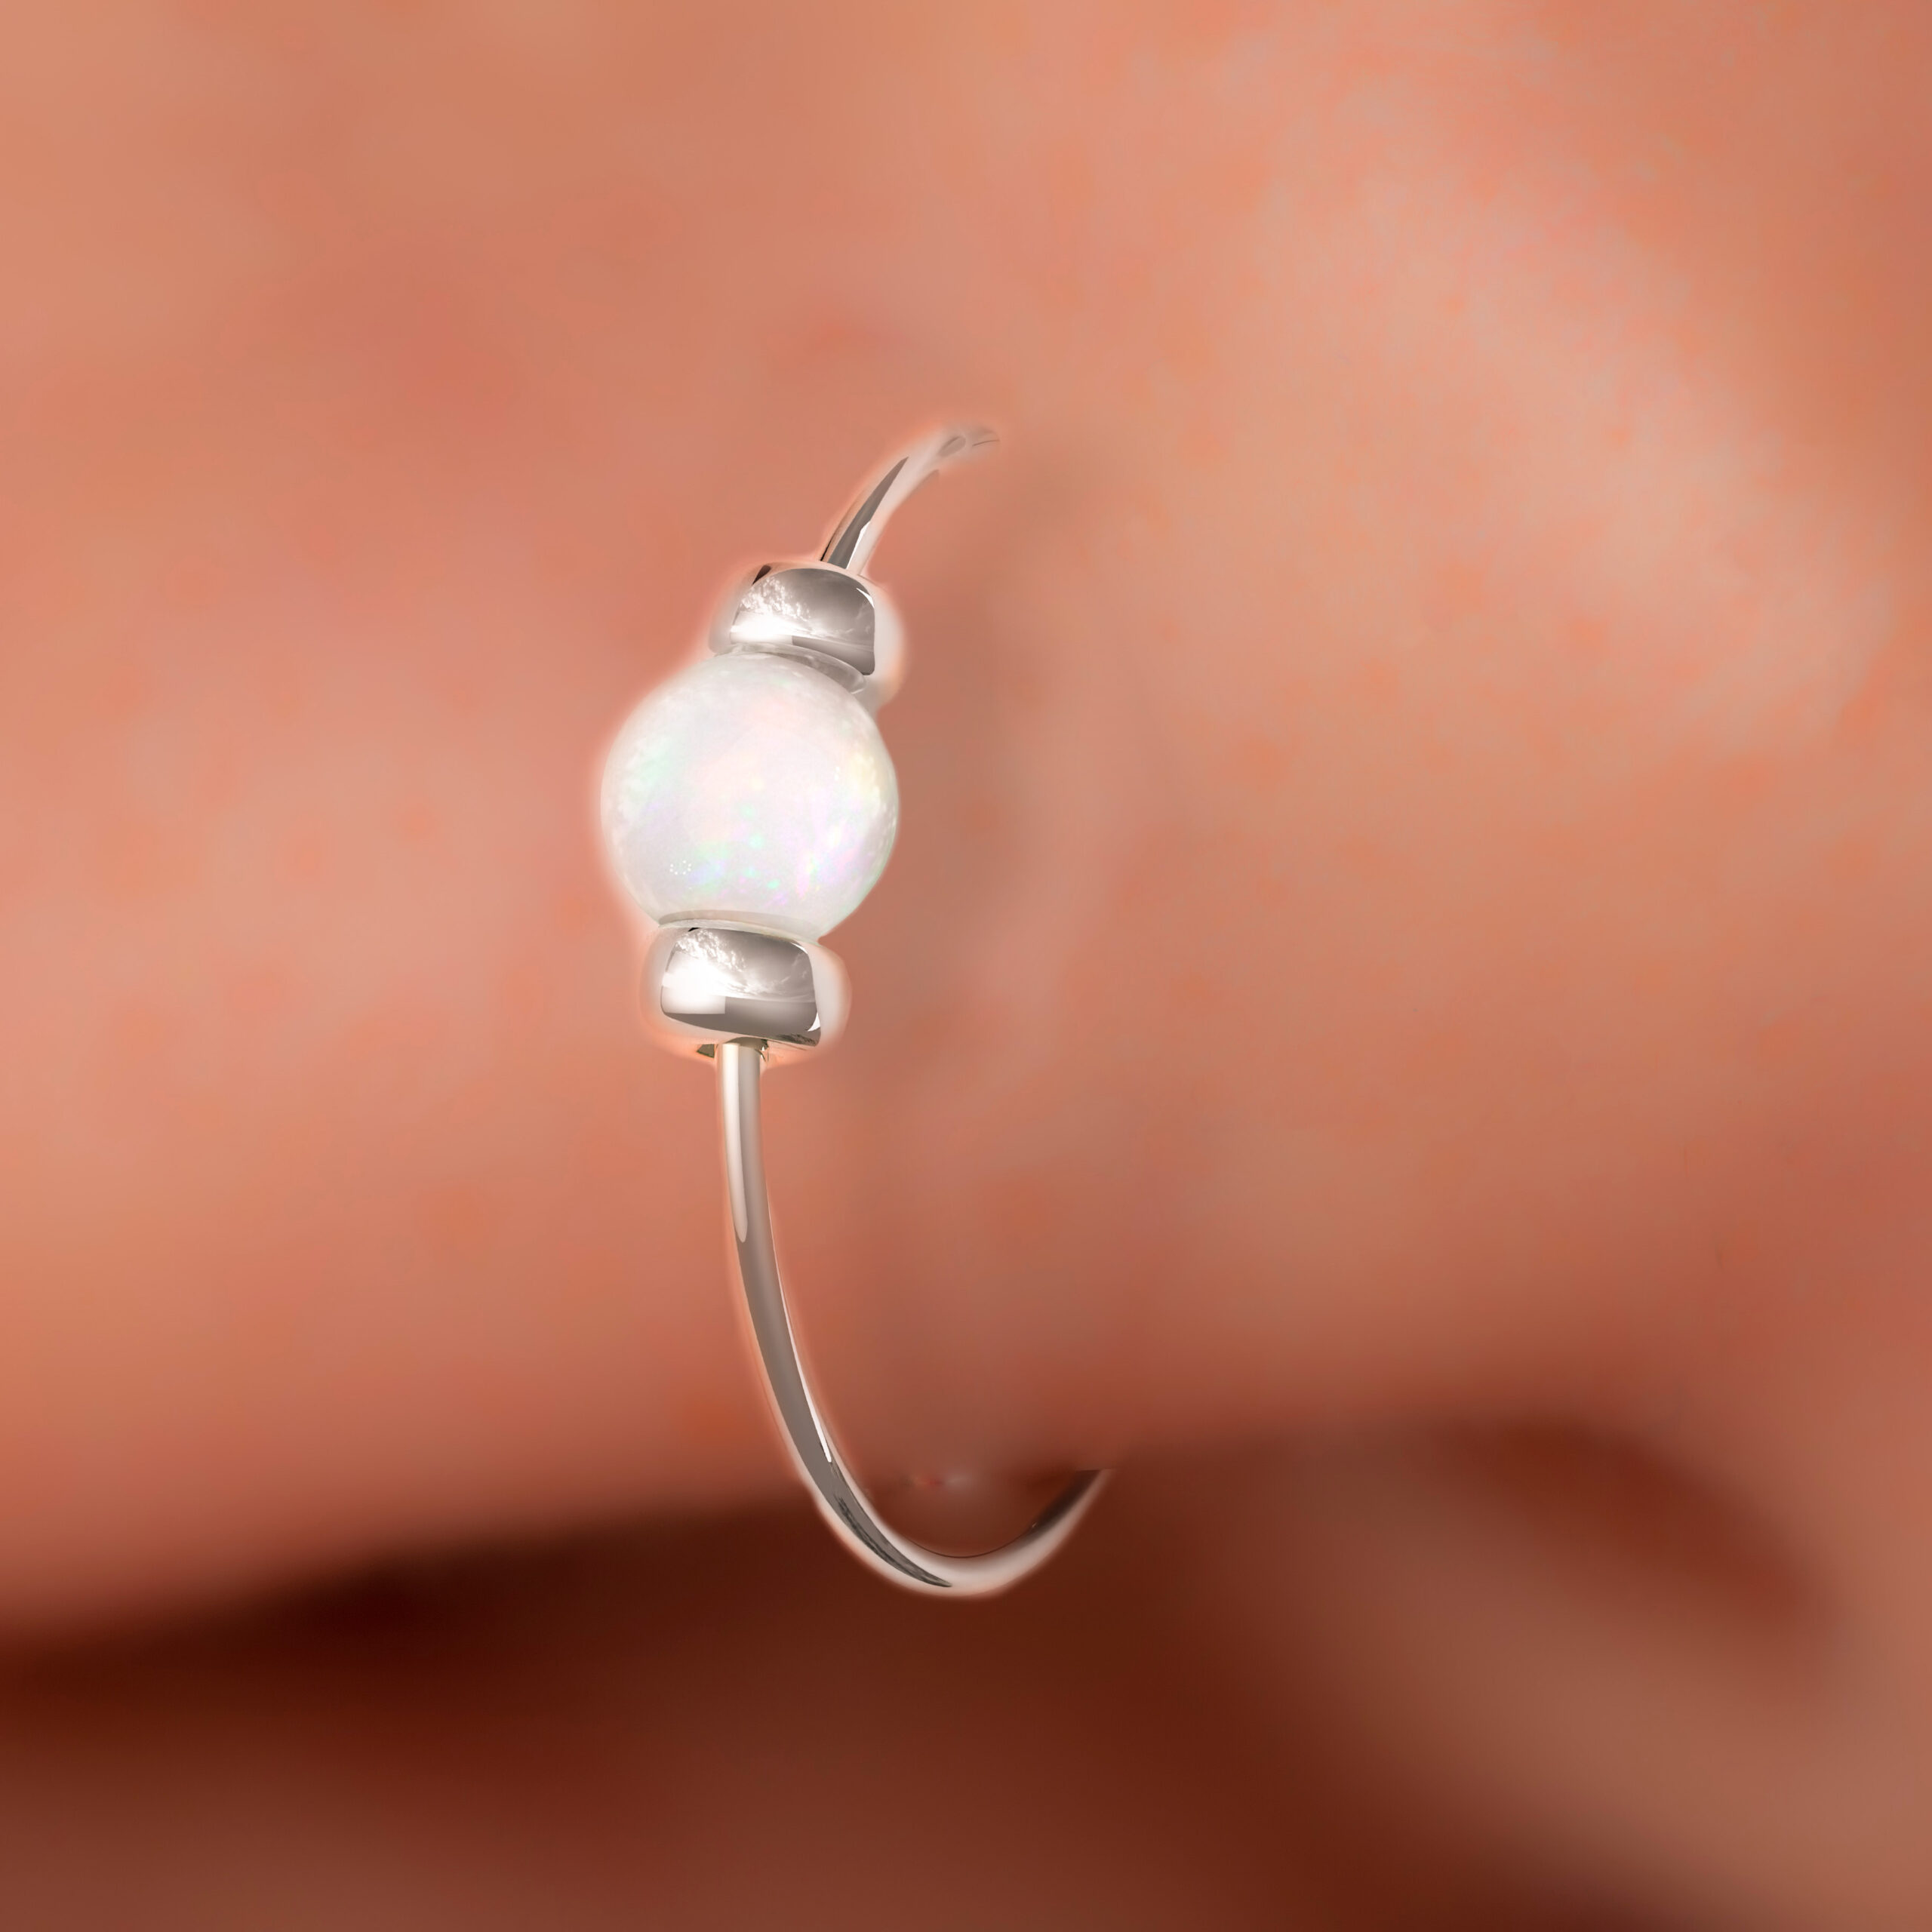 Dalaa Nose Ring // Sterling Silver Nose Ring & Septum Ring